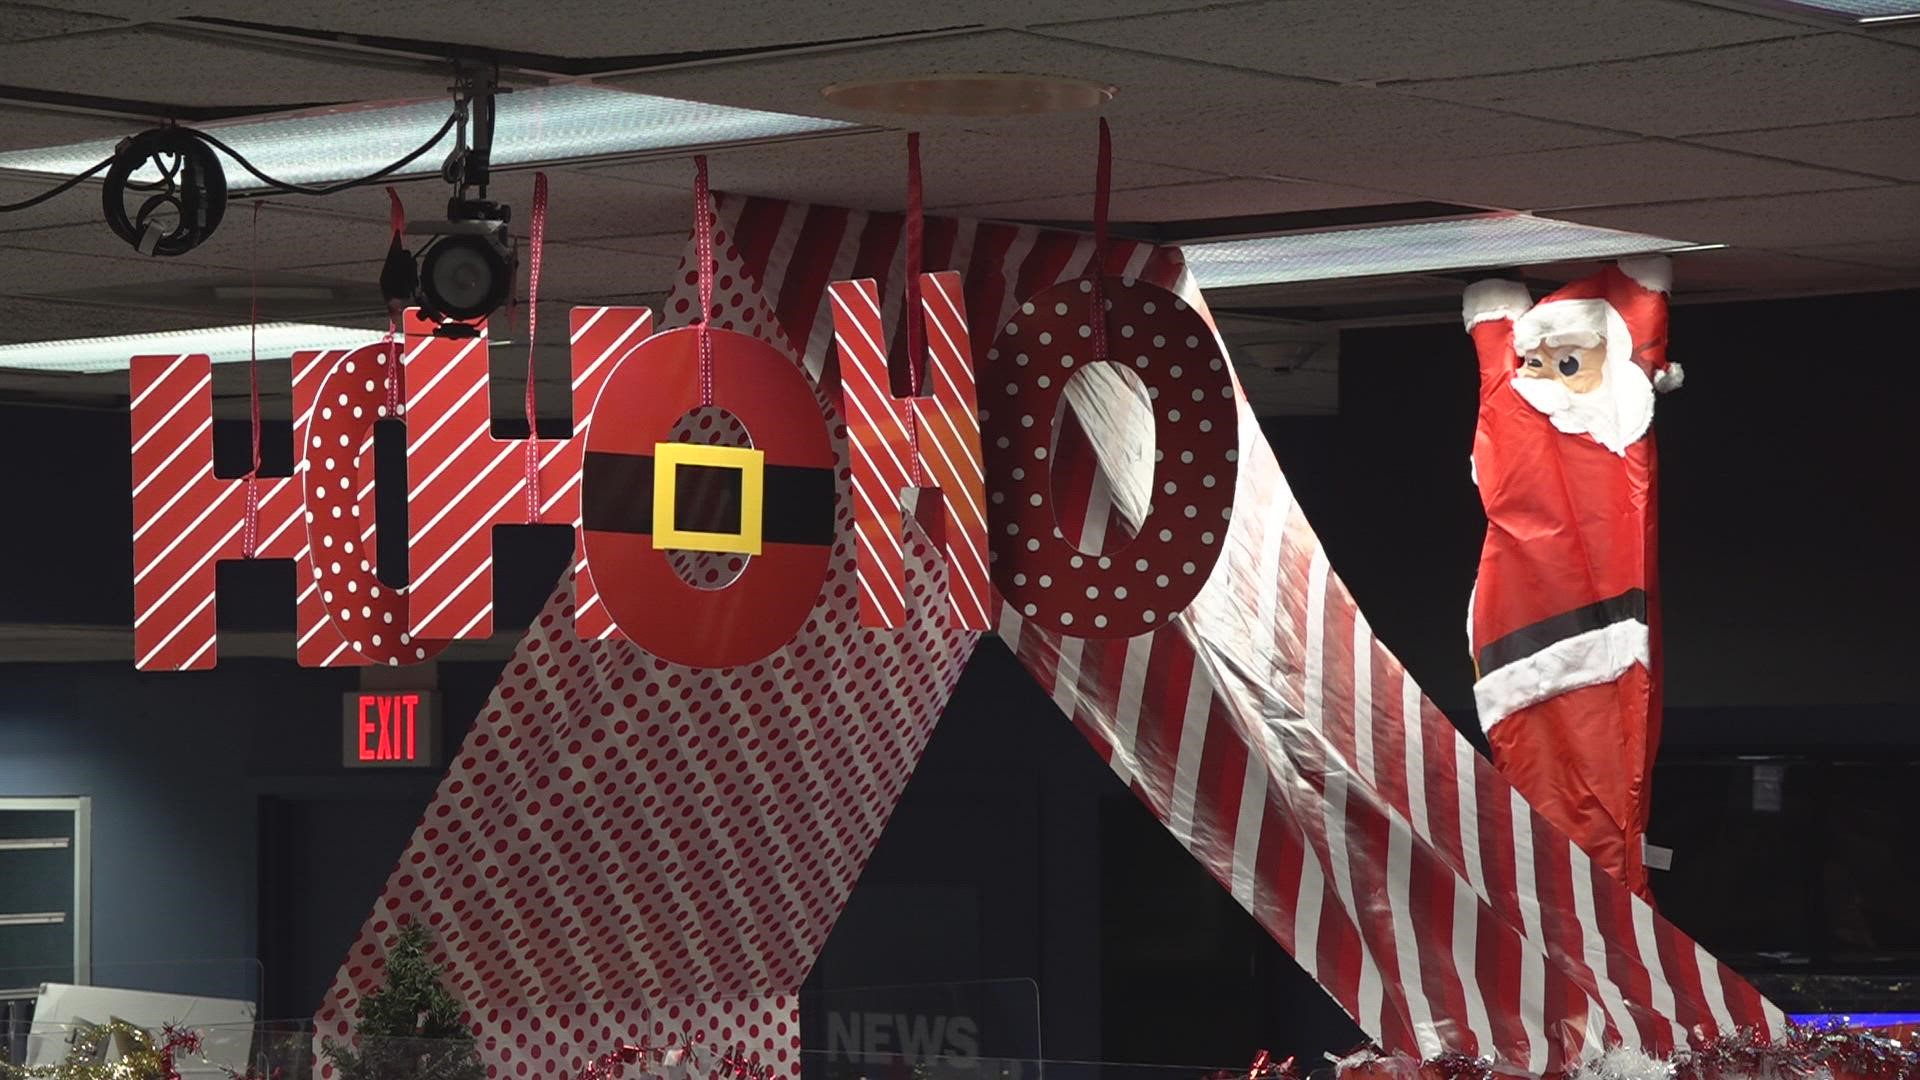 We're getting hype about the holidays here at WFMY News 2.